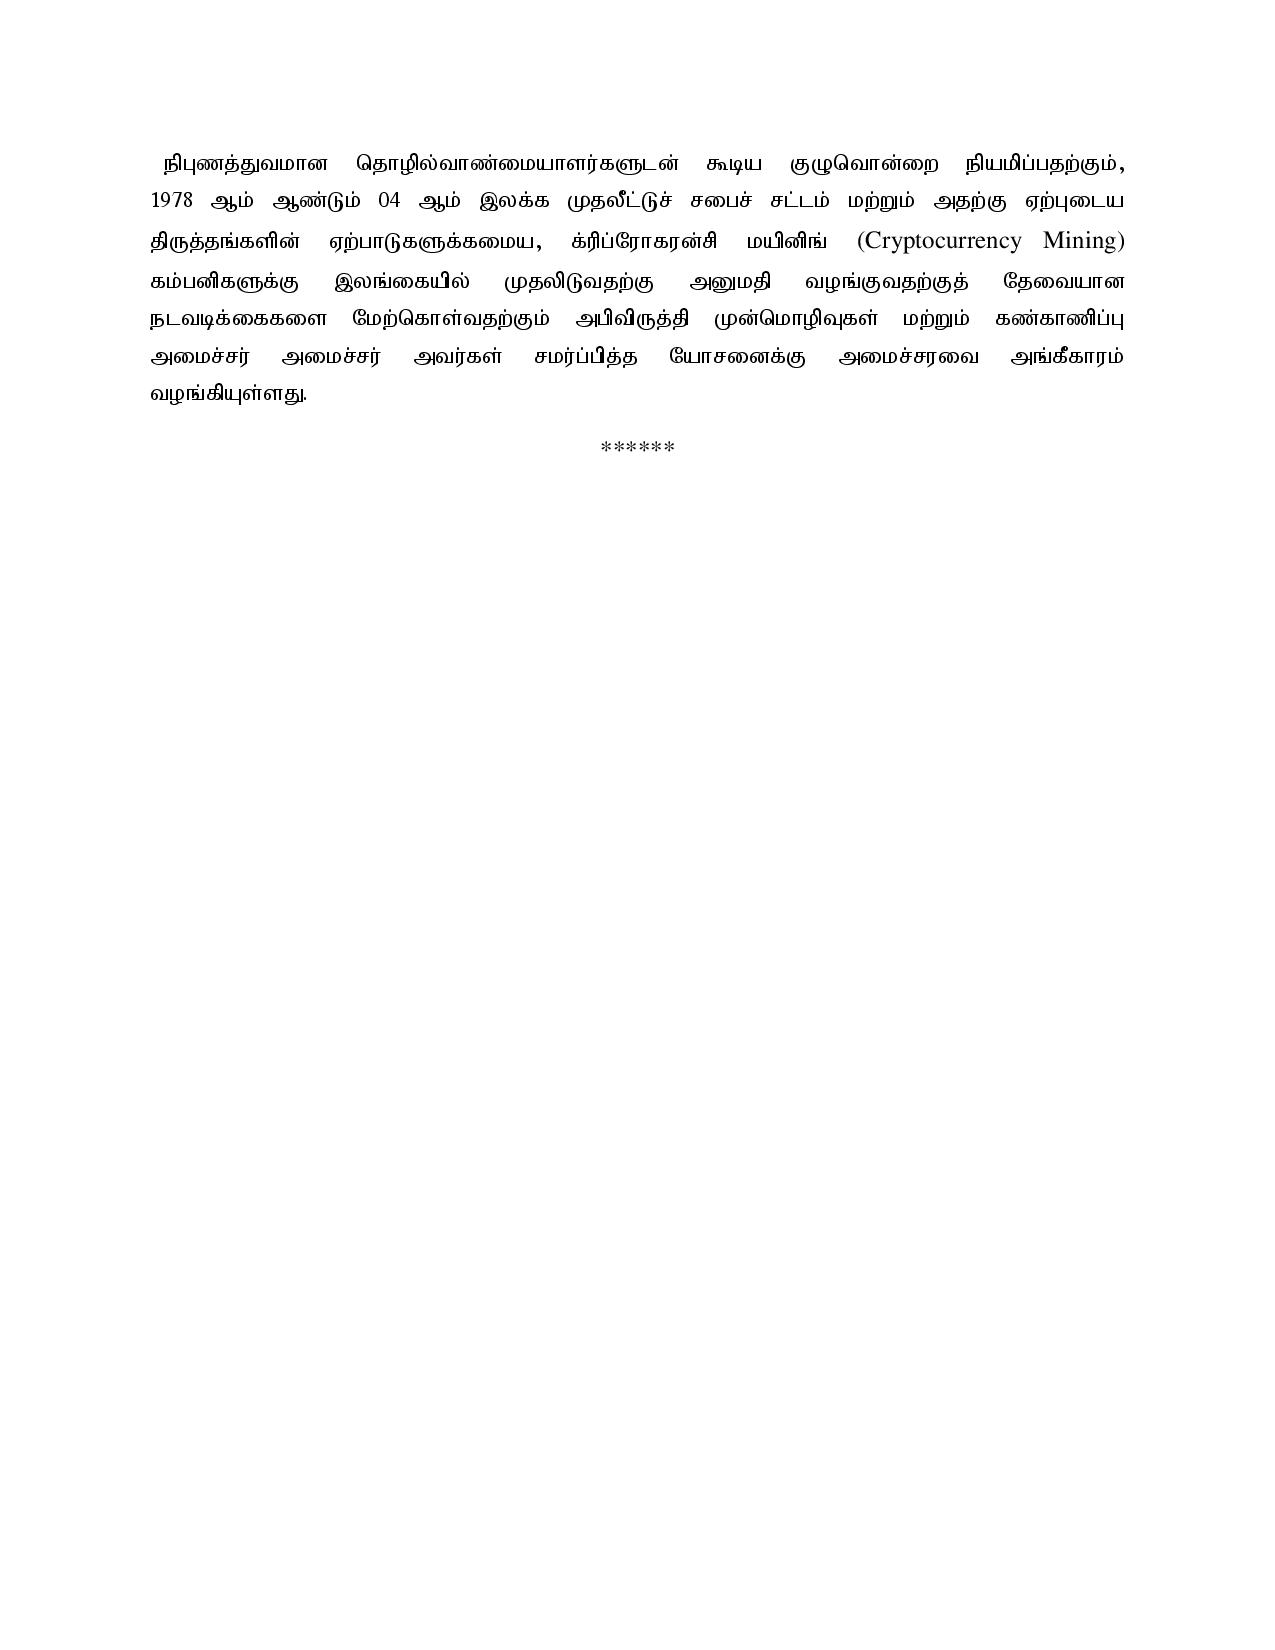 Cabinet Decision on 05.10.2021 Tamil page 006